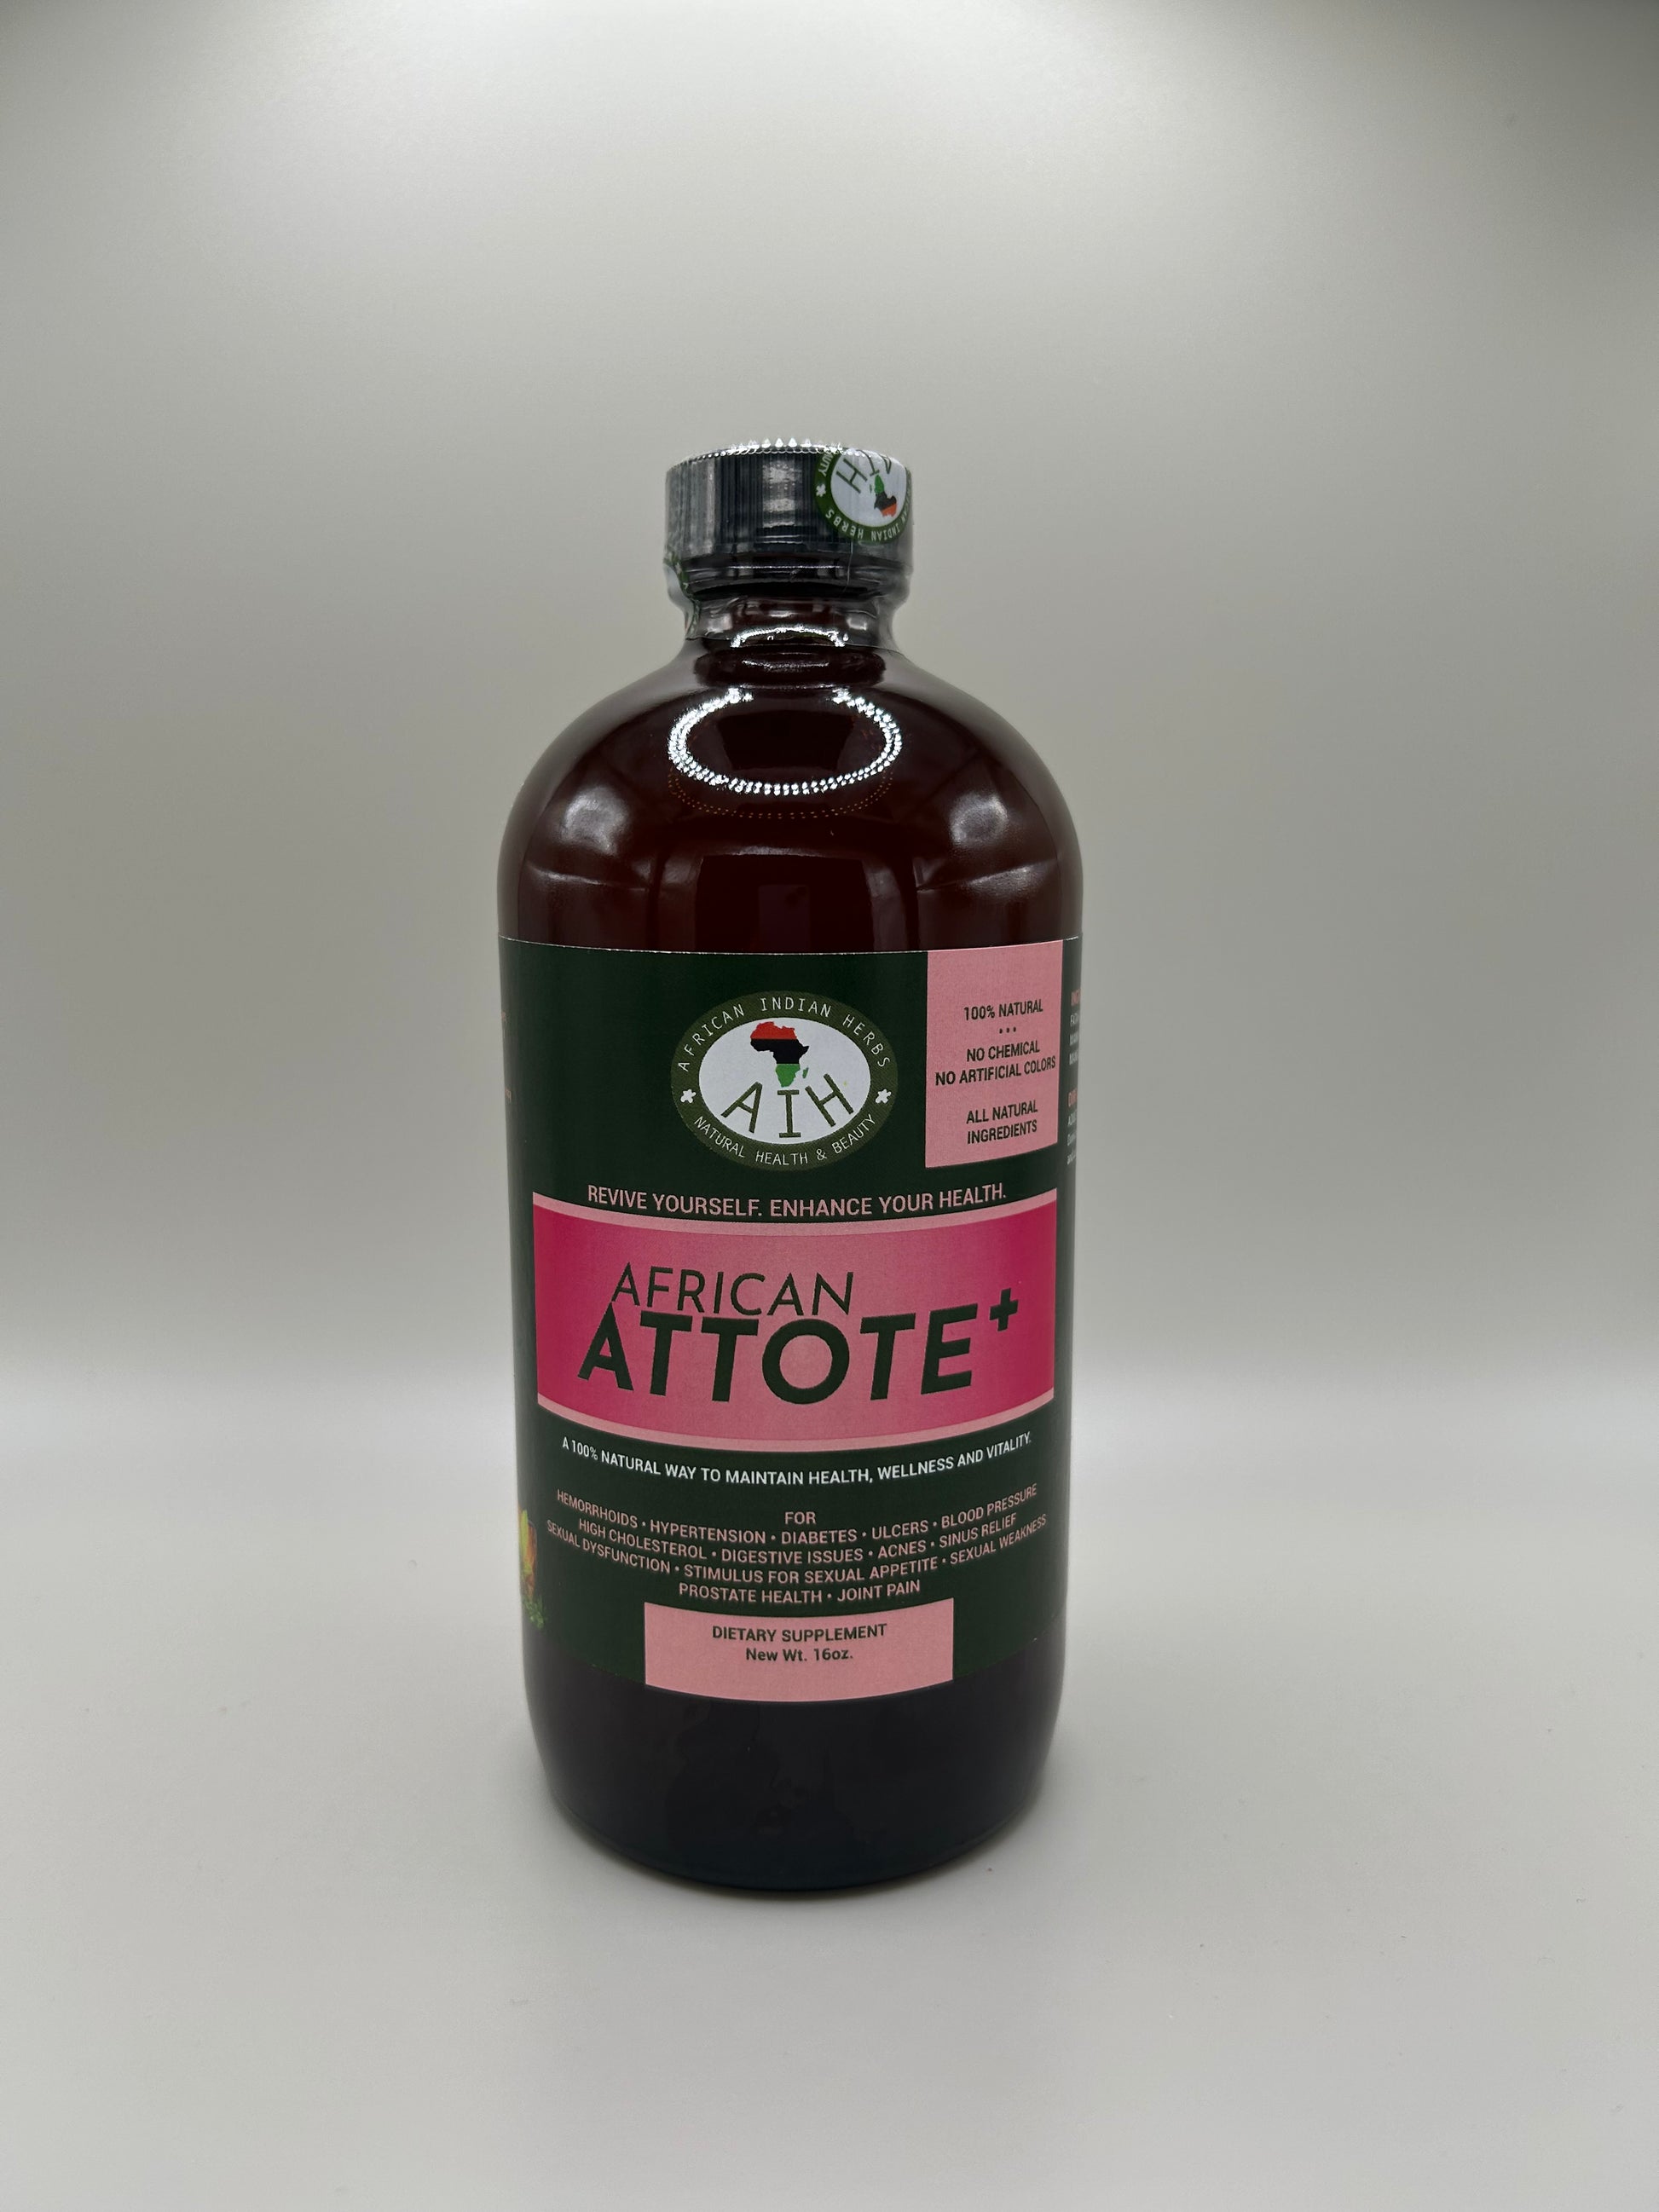 AFRICAN ATTOTE FOR DETOX & ENERGY BOOSTER – Foureras Natural Beauty